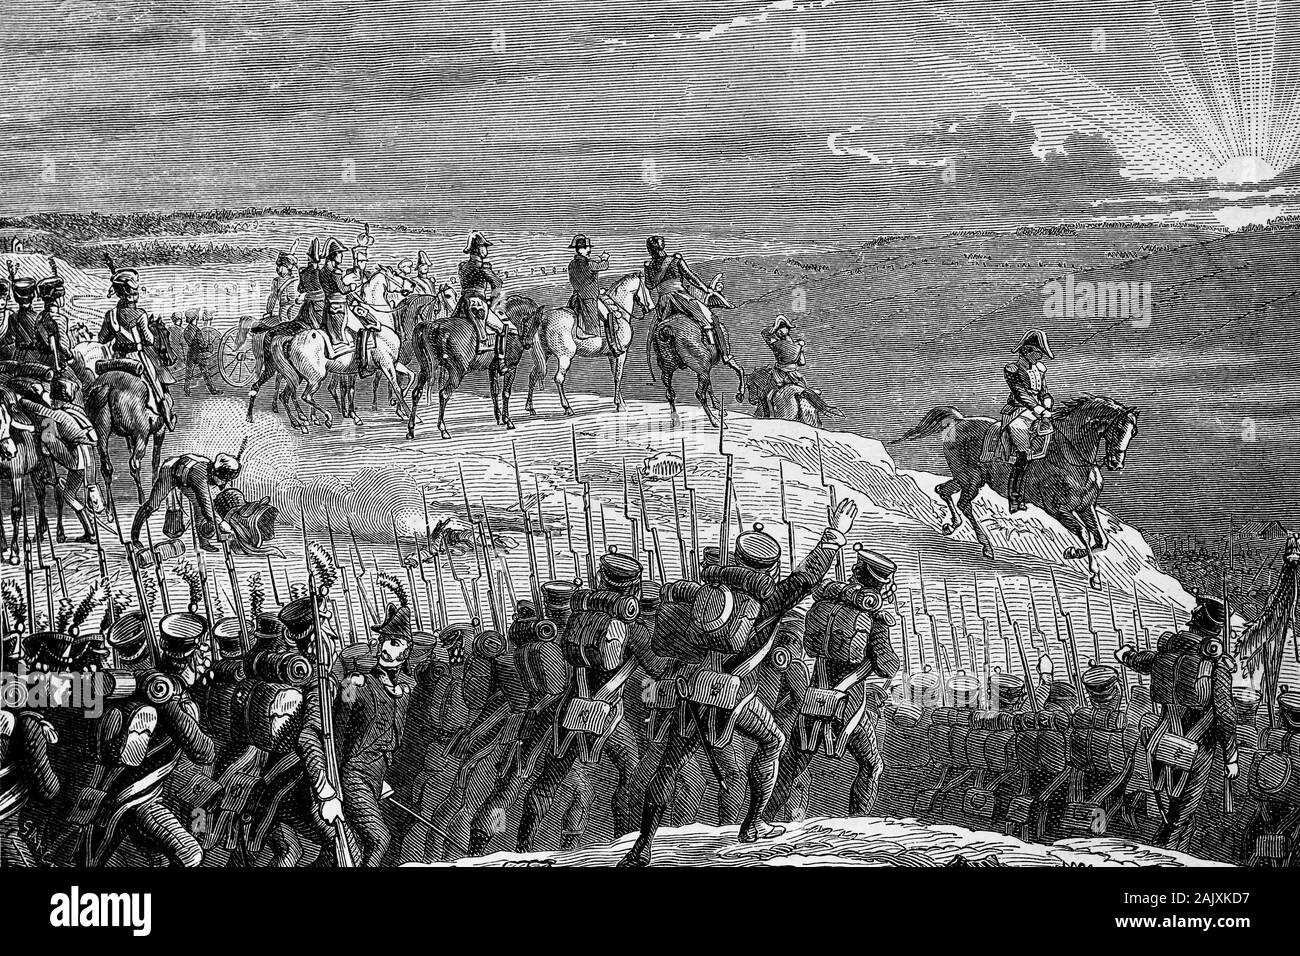 Napoleon giving attack signal. Battle of Austerlitz. 2 December 1805. Decisive French victory. Antique illustration.1890. Stock Photo